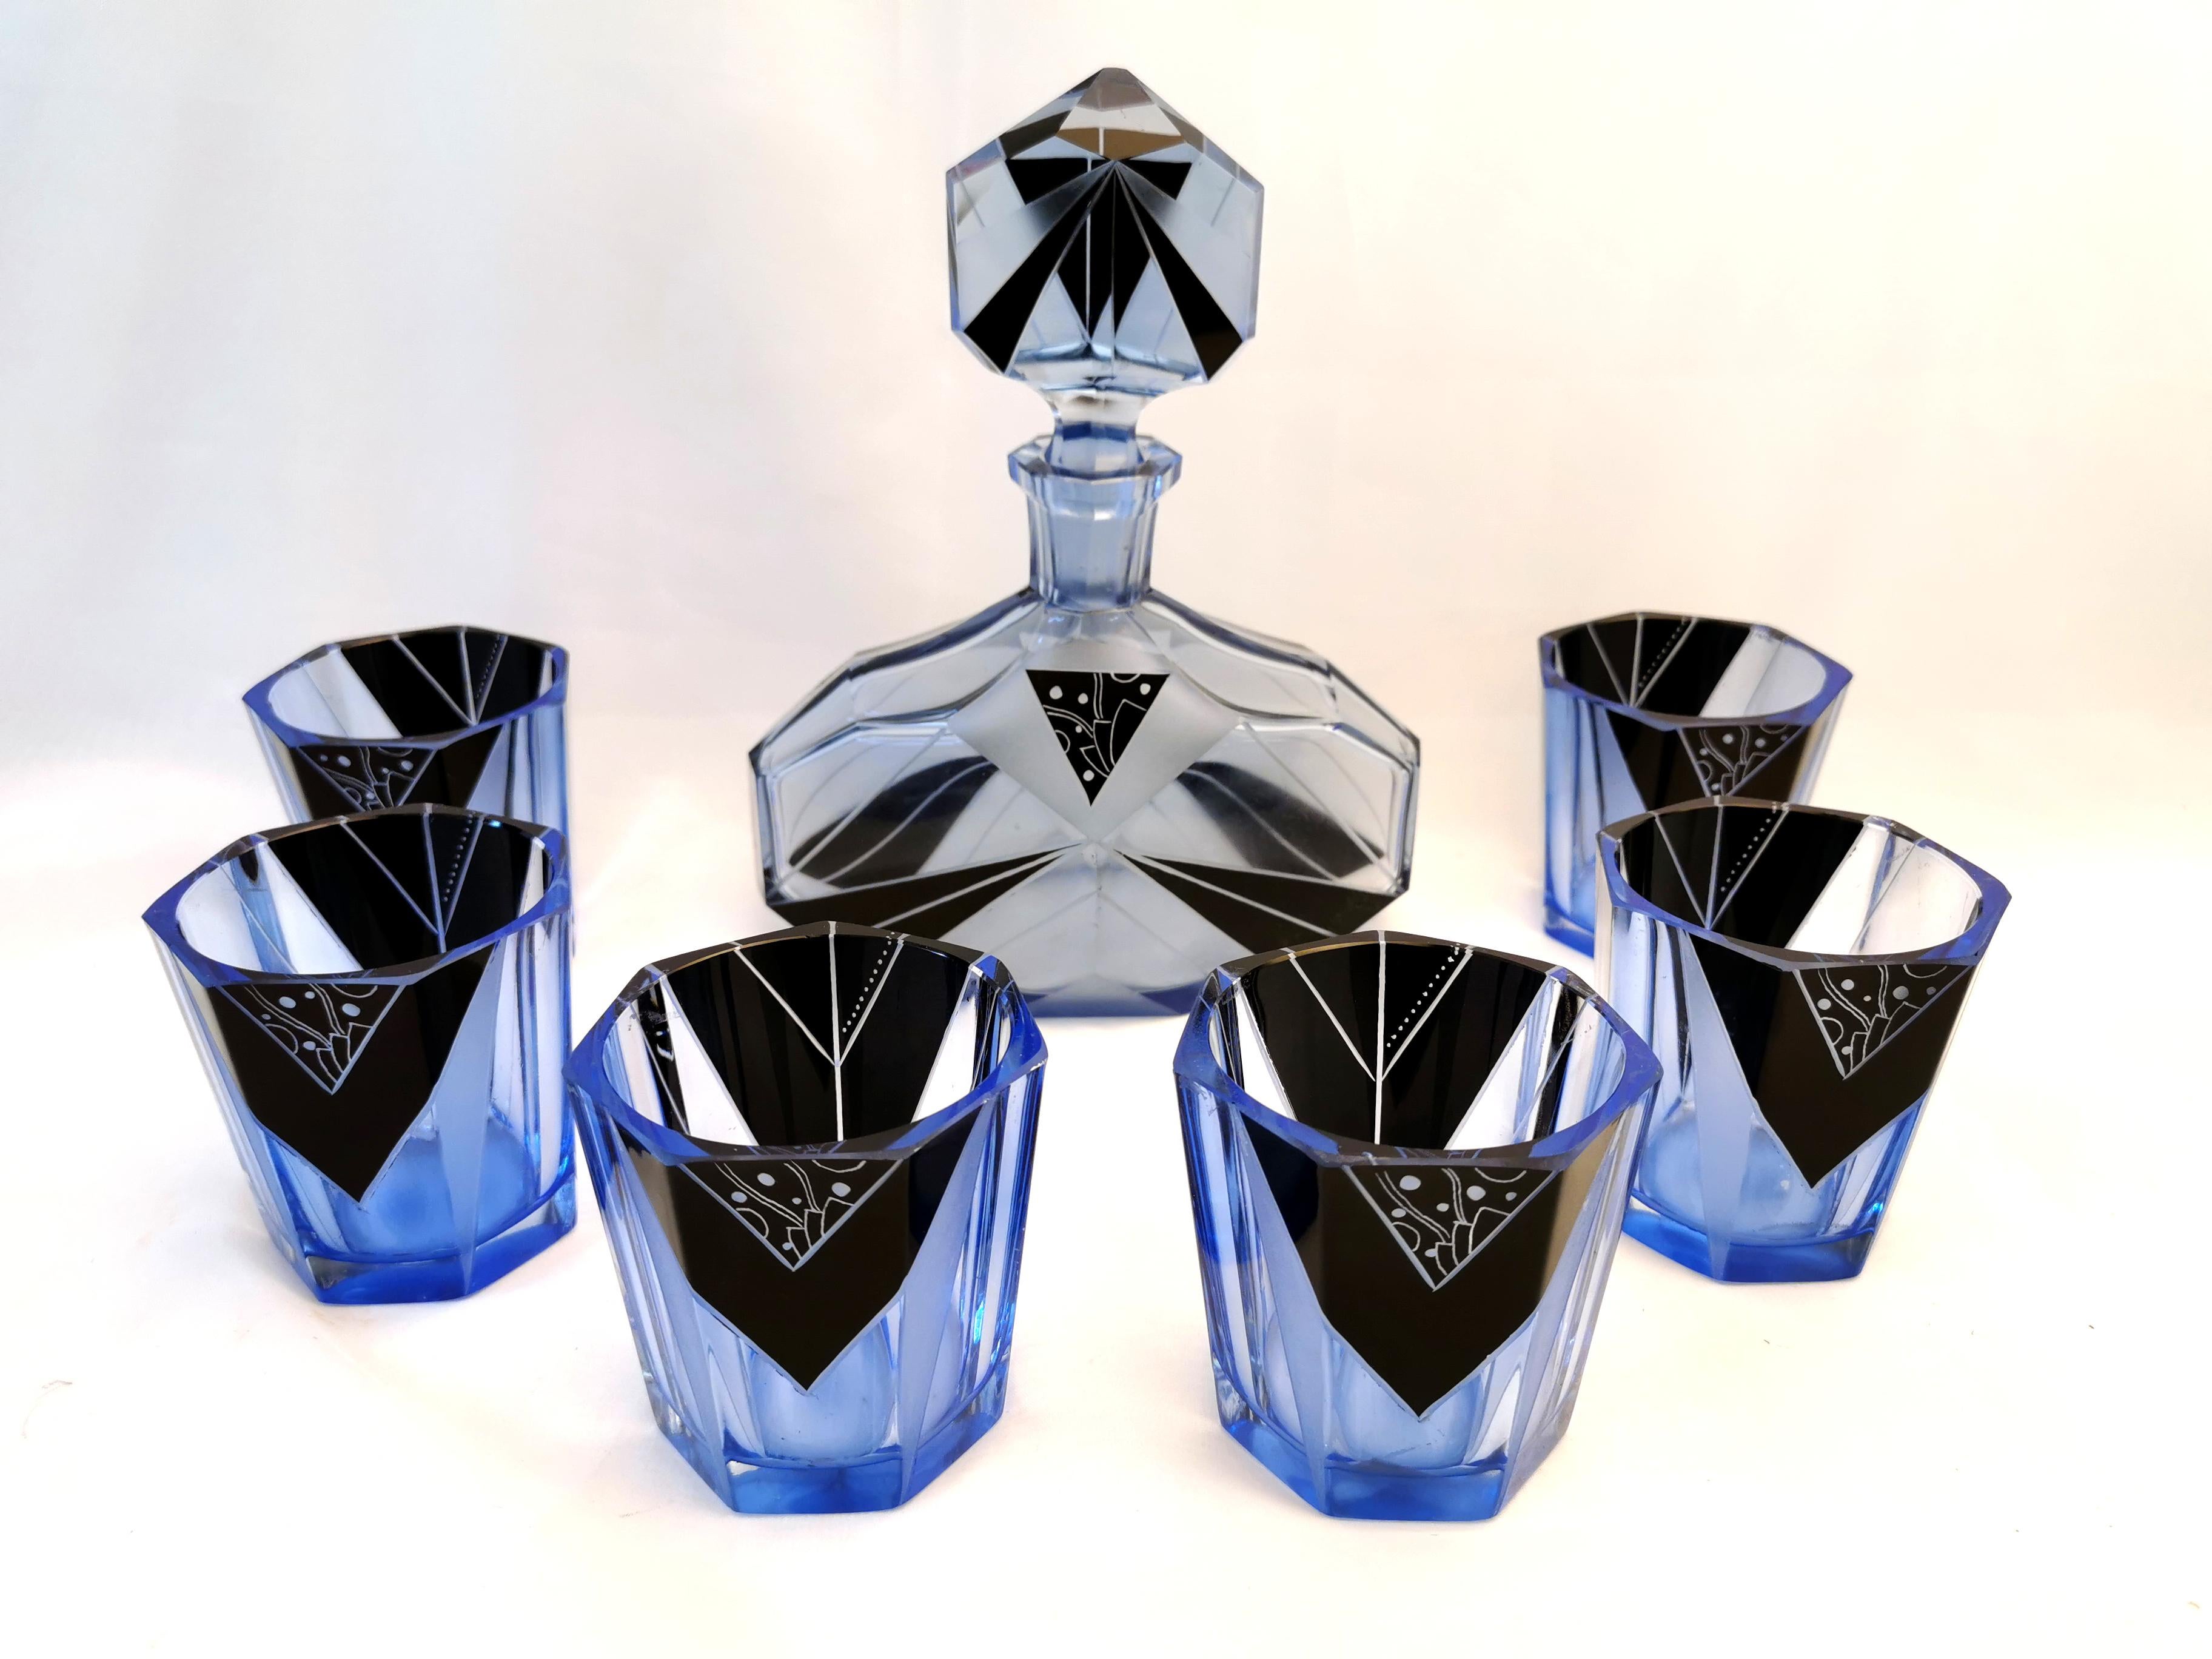 Art Deco Blue and Black Enamel Glass Decanter Set In Good Condition For Sale In Devon, England